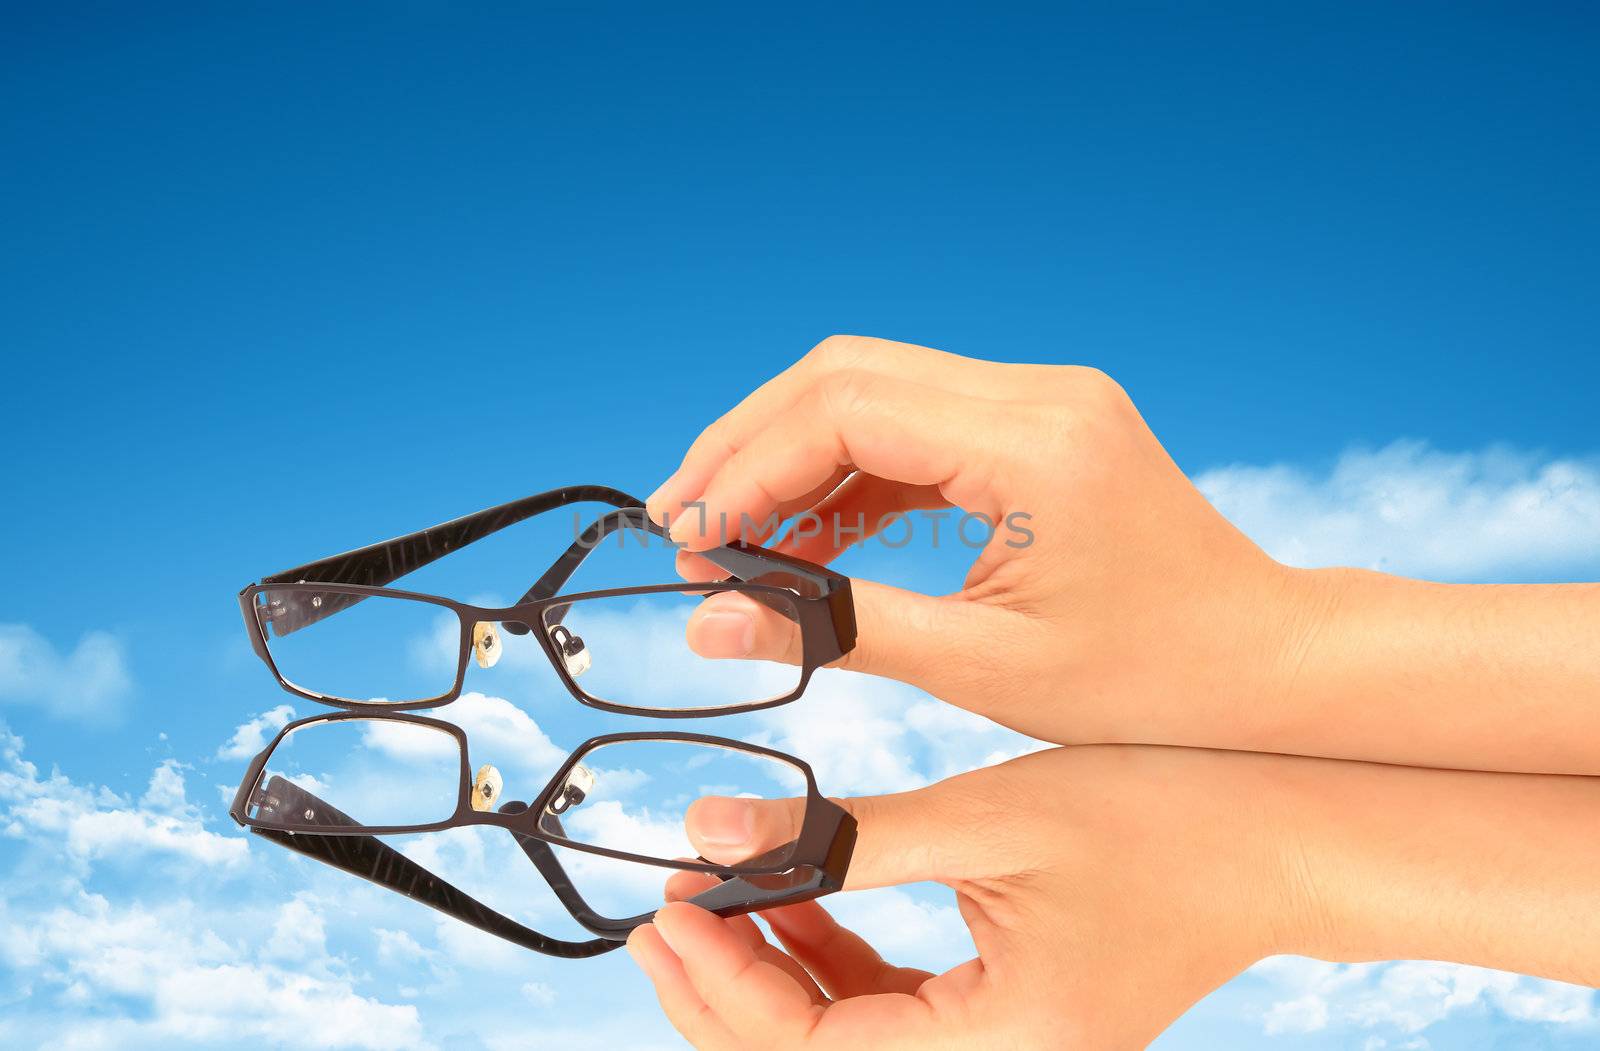 Glasses against blue sky 
 by rufous